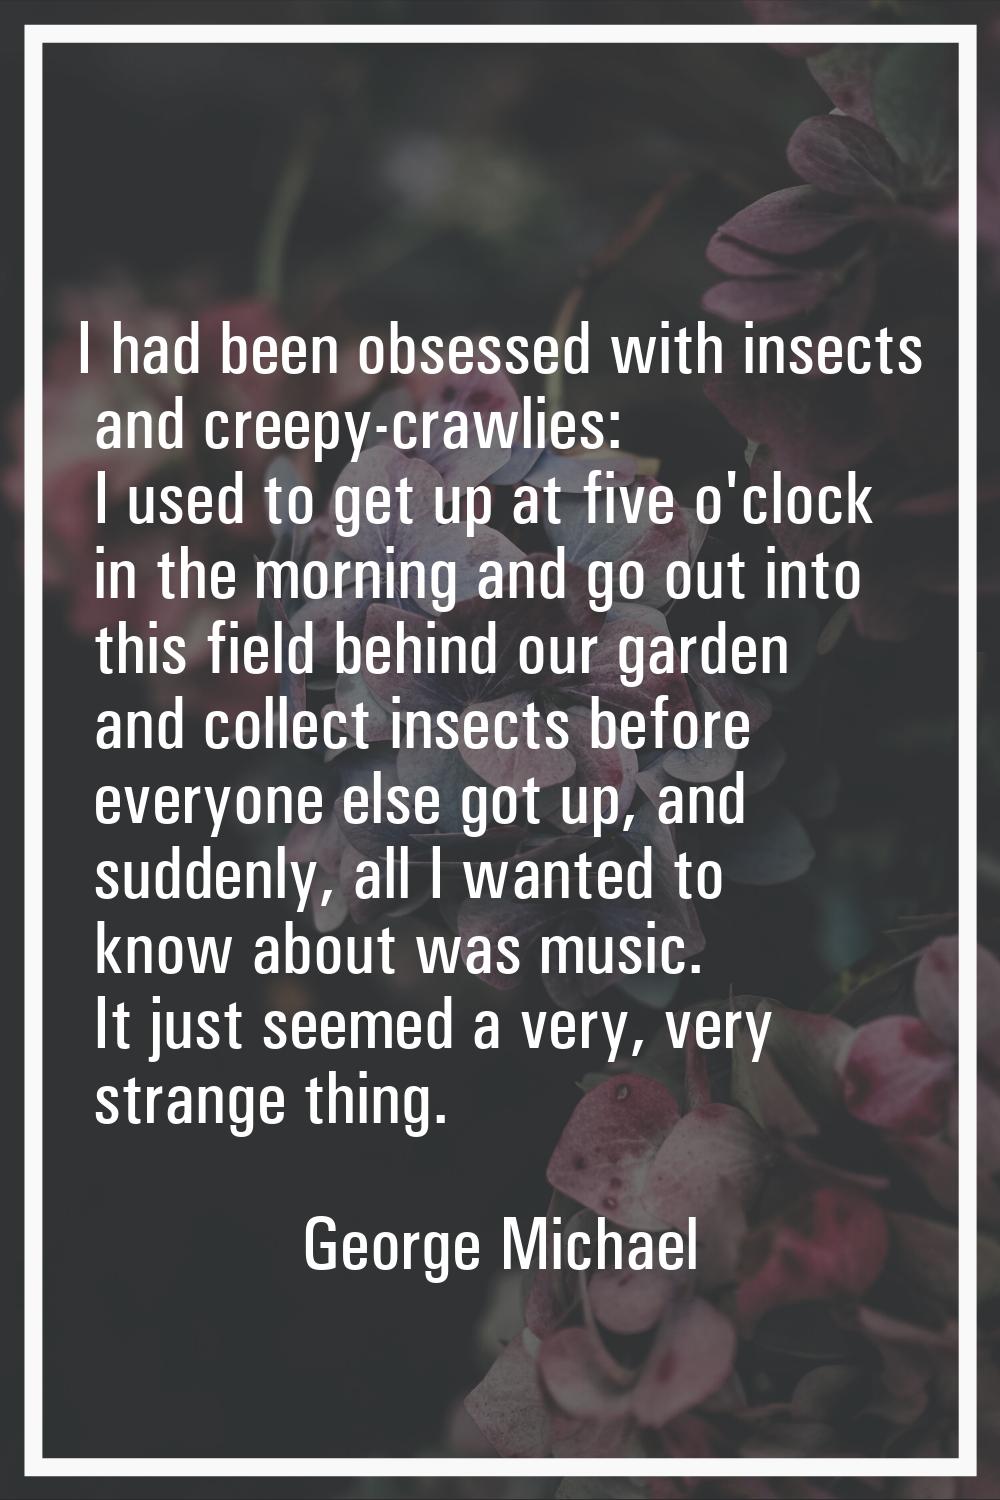 I had been obsessed with insects and creepy-crawlies: I used to get up at five o'clock in the morni